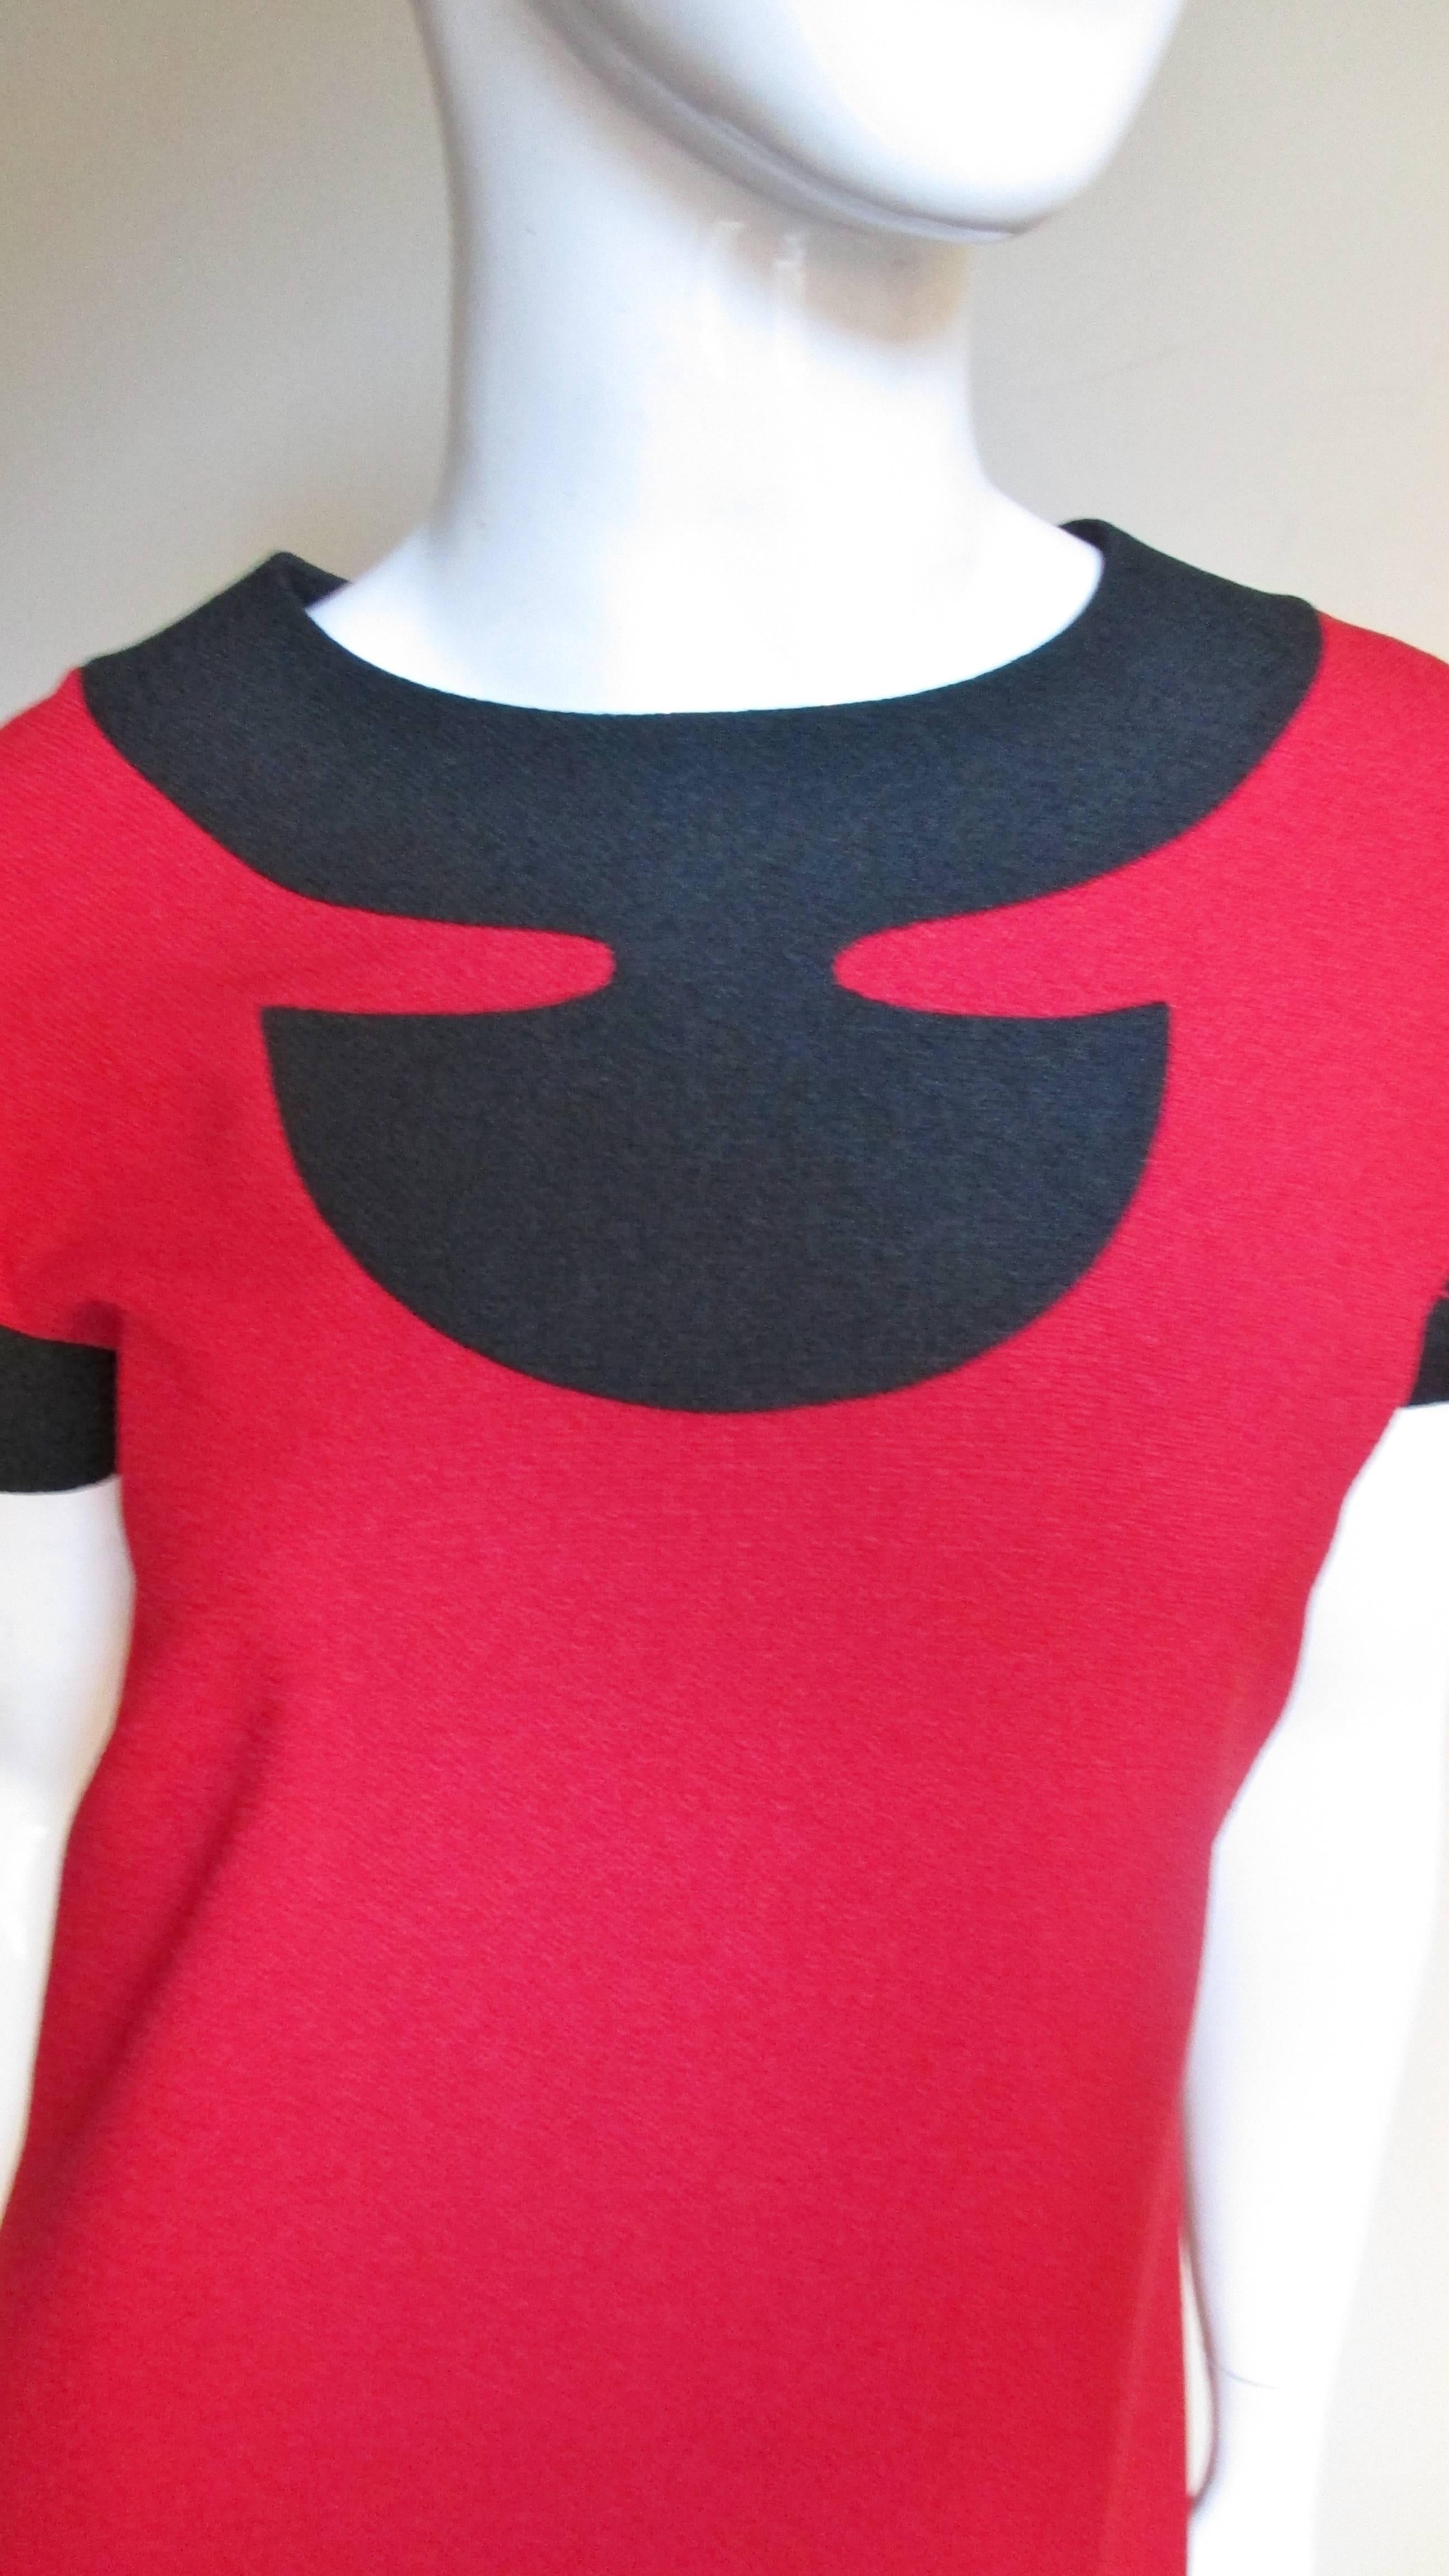 Pierre Cardin 1980s Mod Color Block Dress In Excellent Condition For Sale In Water Mill, NY